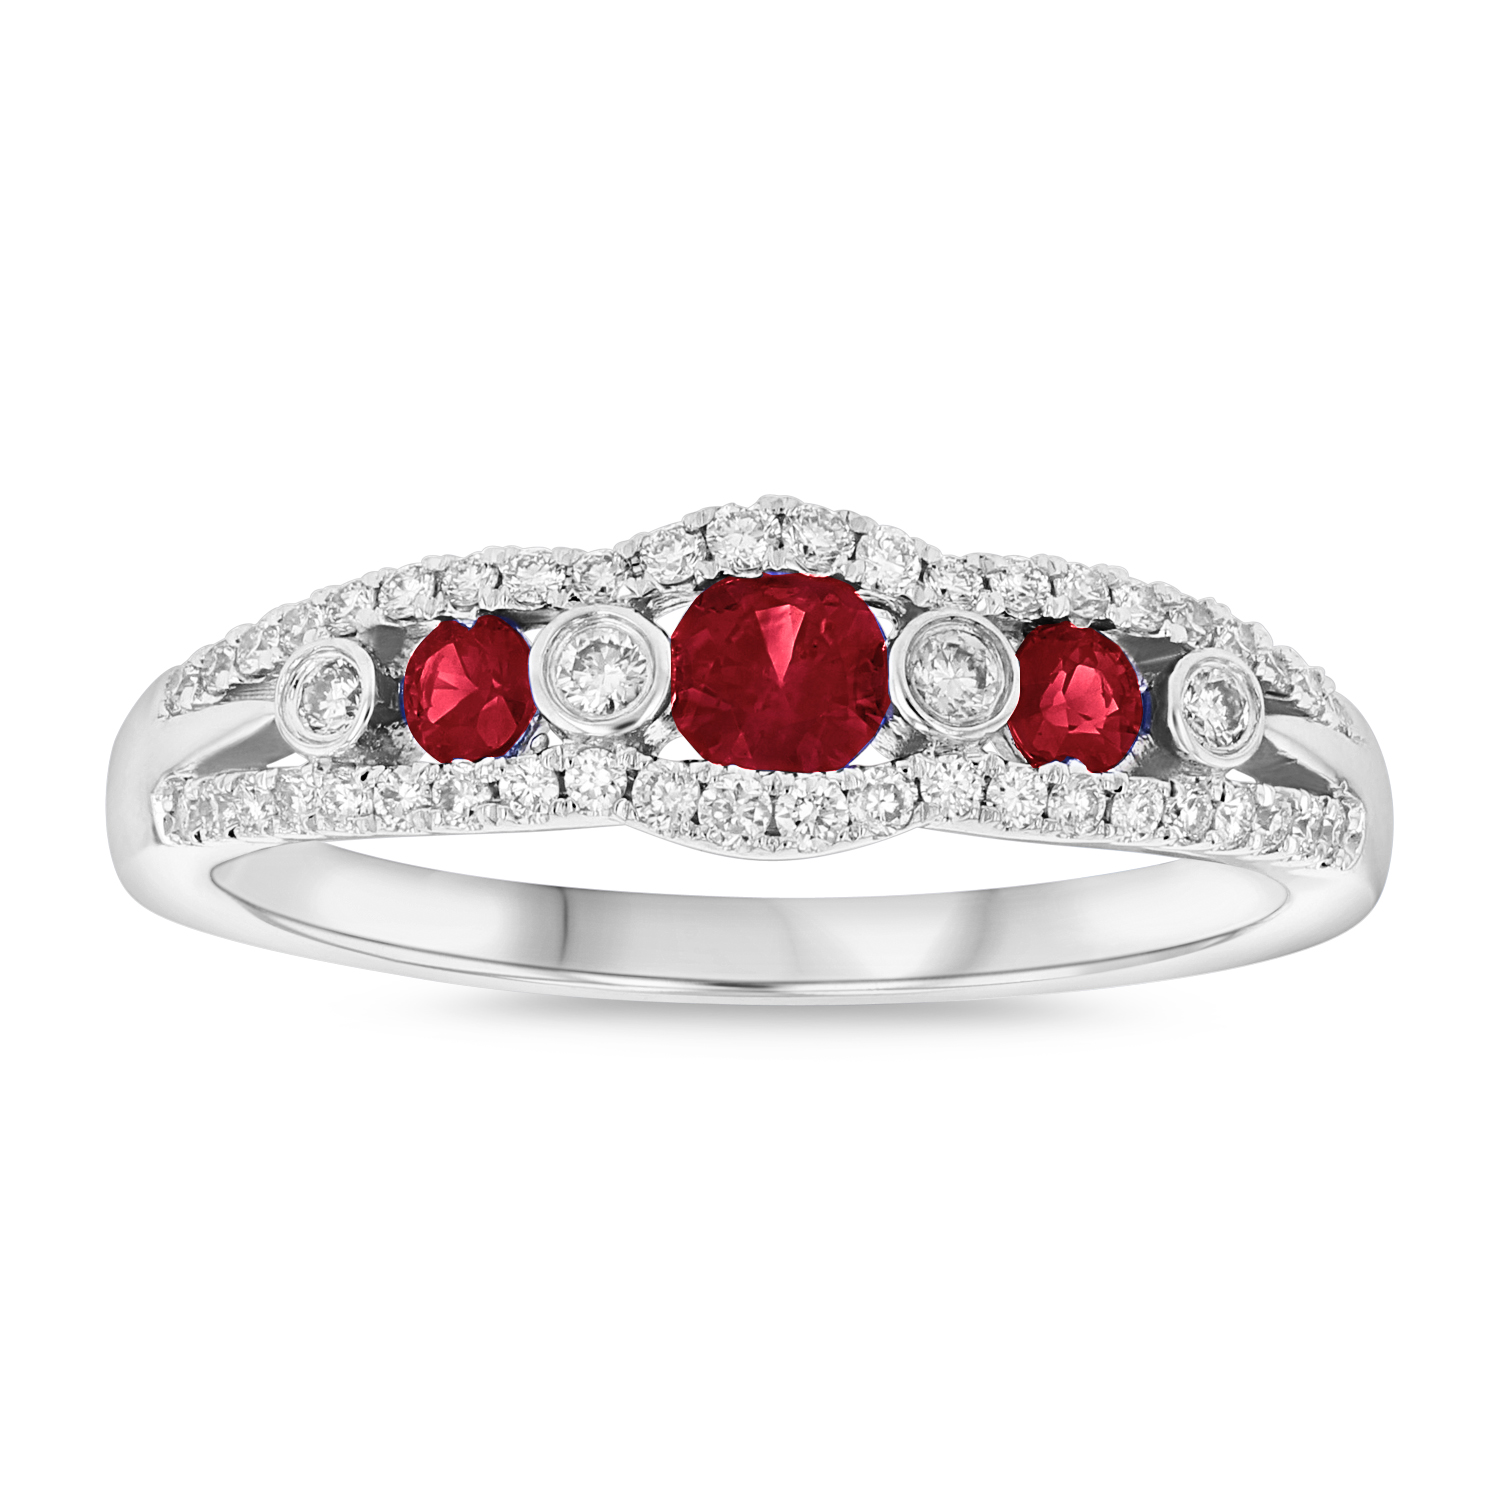 View 0.61ctw Ruby and Diamond Ring in 14k White Gold